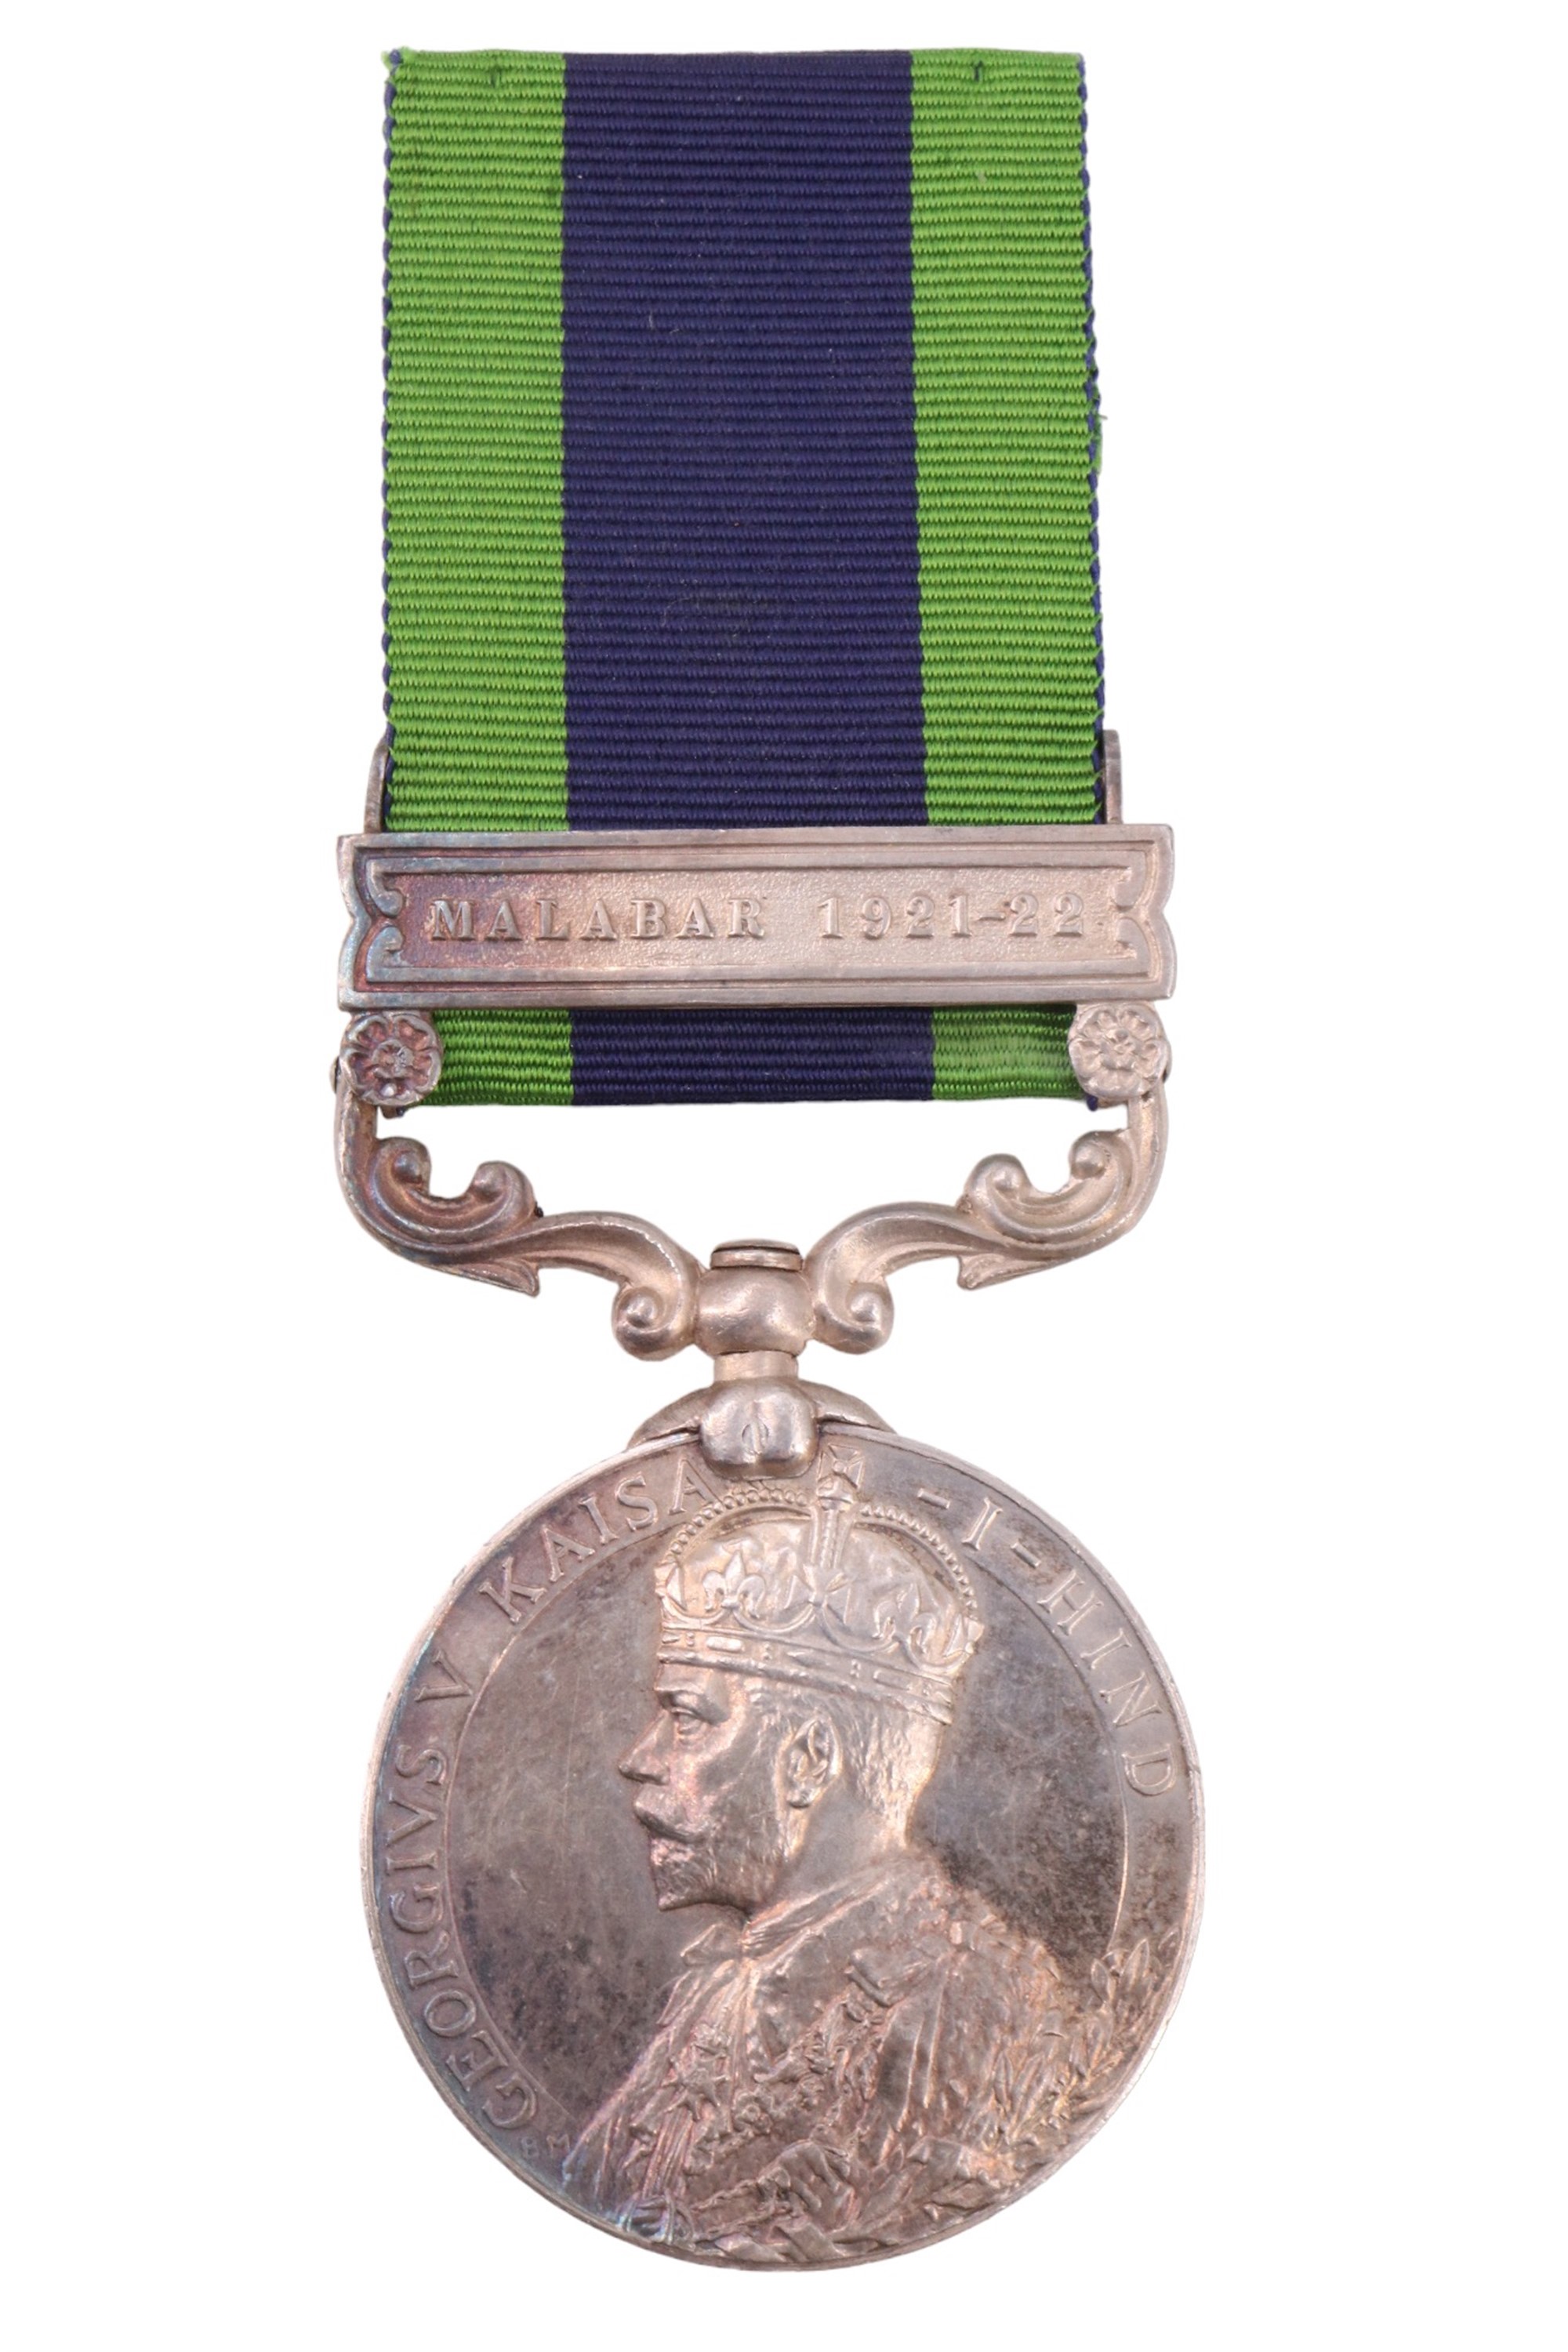 An India General Service Medal with Malabar 1921-22 clasp to 5718558 Pte H J Thompson, Dorset